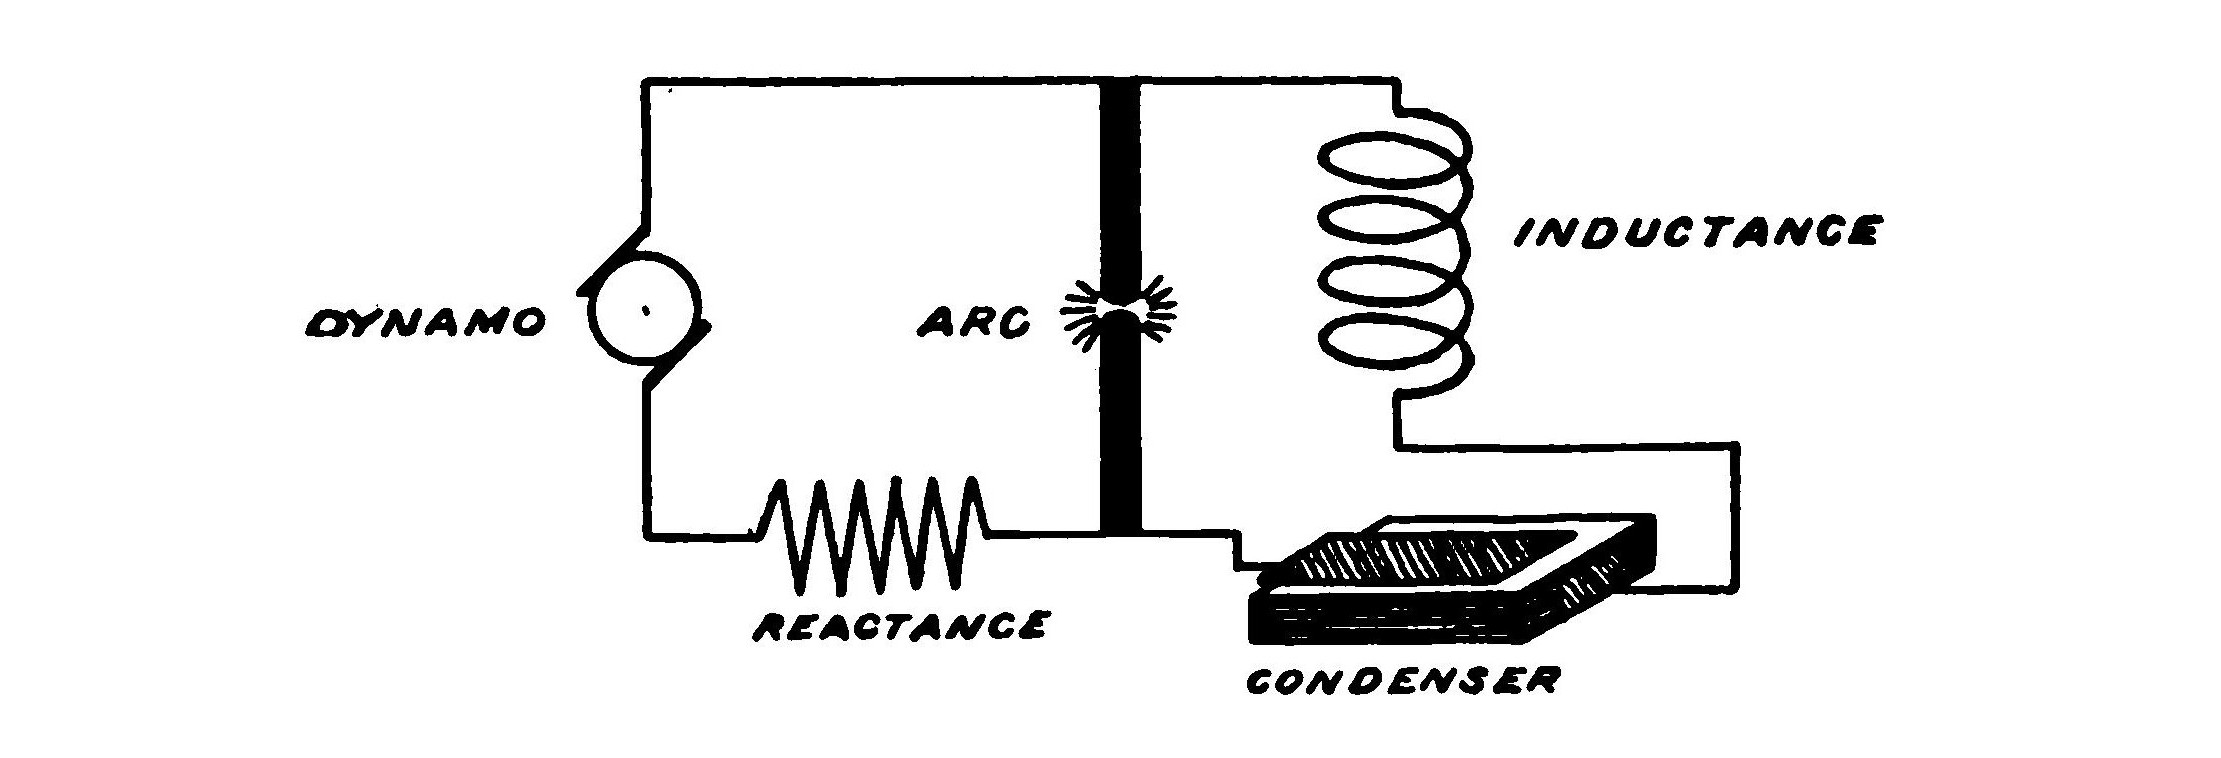 FIG. 138.—Circuit showing how a singing arc is arranged.